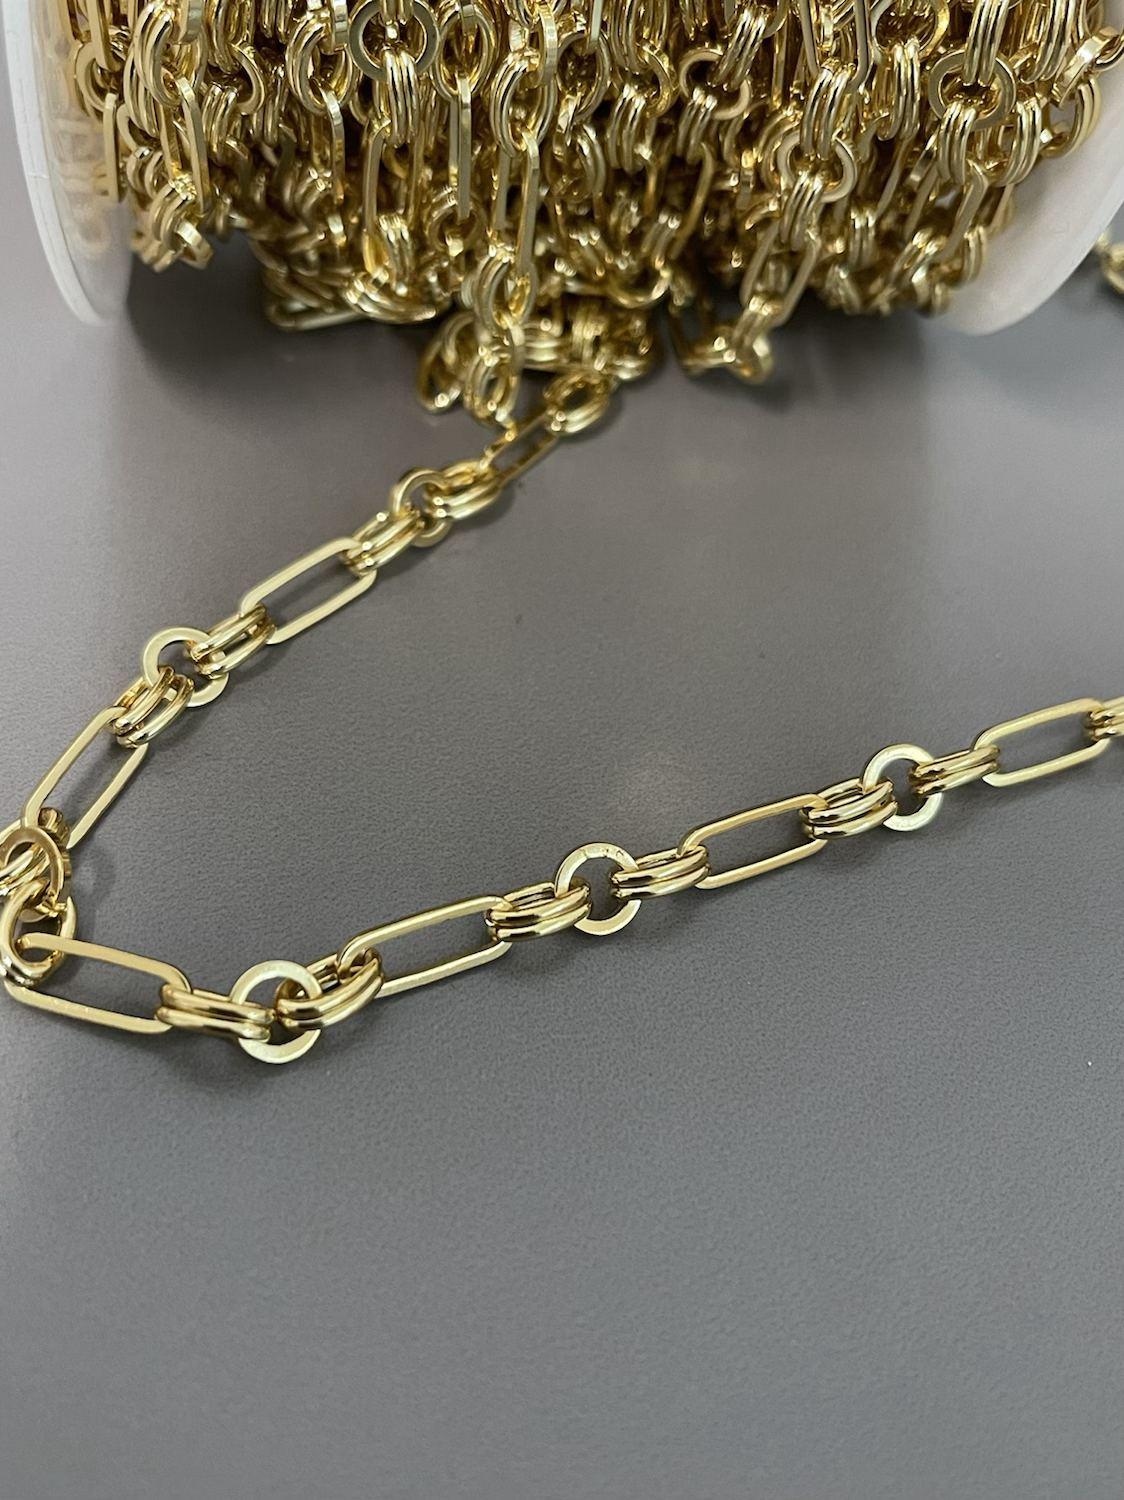 13mm oval link chain double by ft 22329 chain is 18k